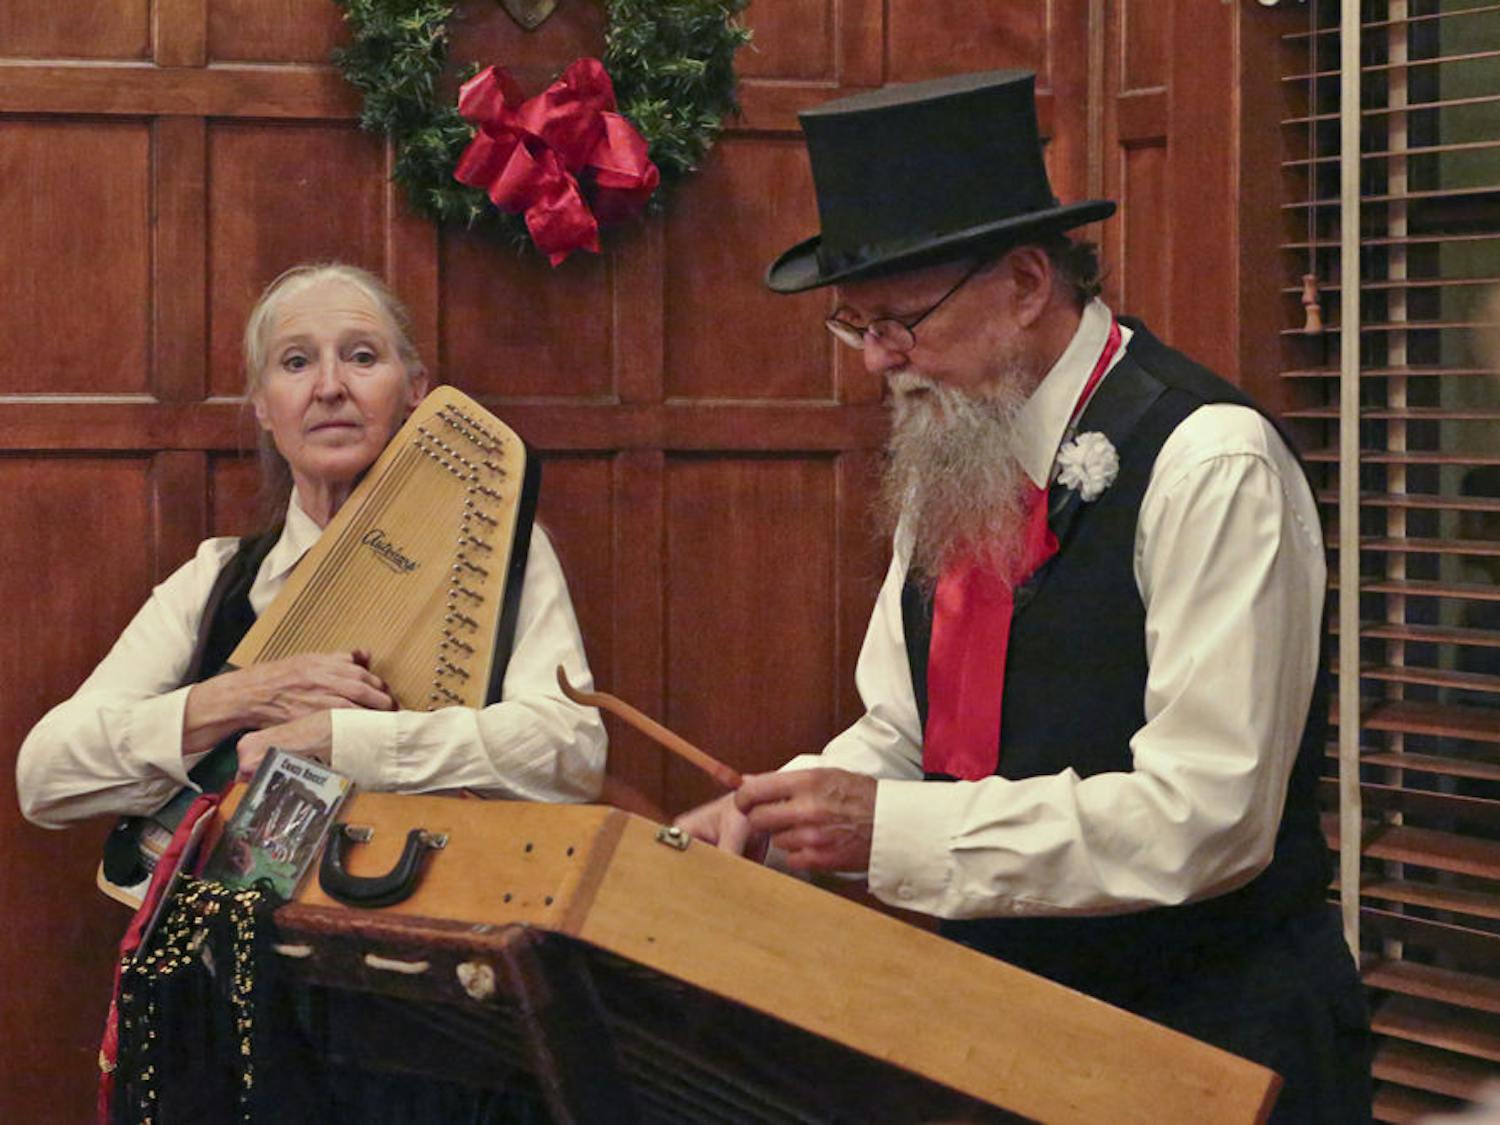 Joyce Lillquist plays the chorded zither while her husband, Jim, plays the hammer dulcimer during the annual Holiday Tree Lighting ceremony at the Historic Thomas Center on Dec. 5, 2015. The Gypsy Guerrilla Band, composed of the couple, performed a variety of holiday tunes.